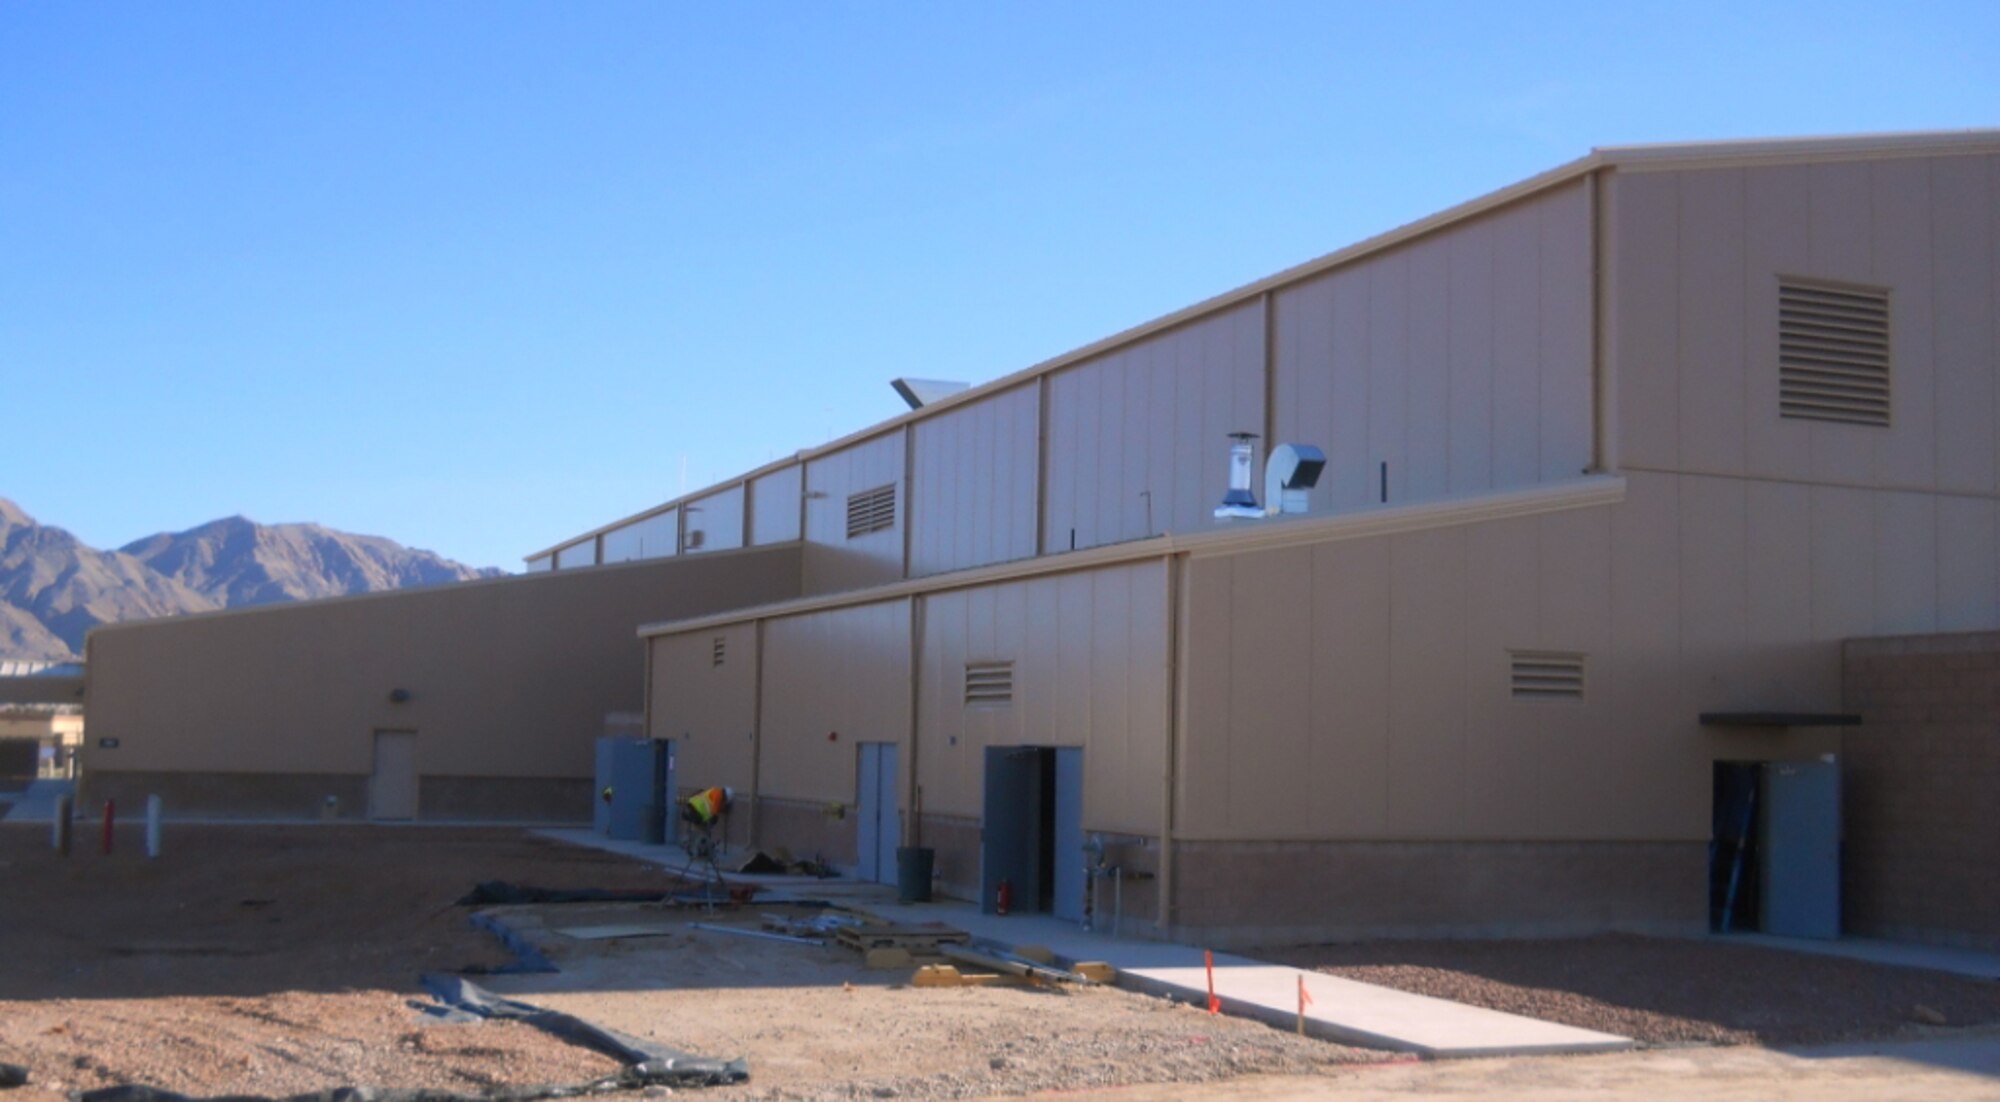 This fuel cell hangar at Nellis Air Force Base, Nevada, serve the F-35 Lightning II fleet. (U.S. Air Force Photo)